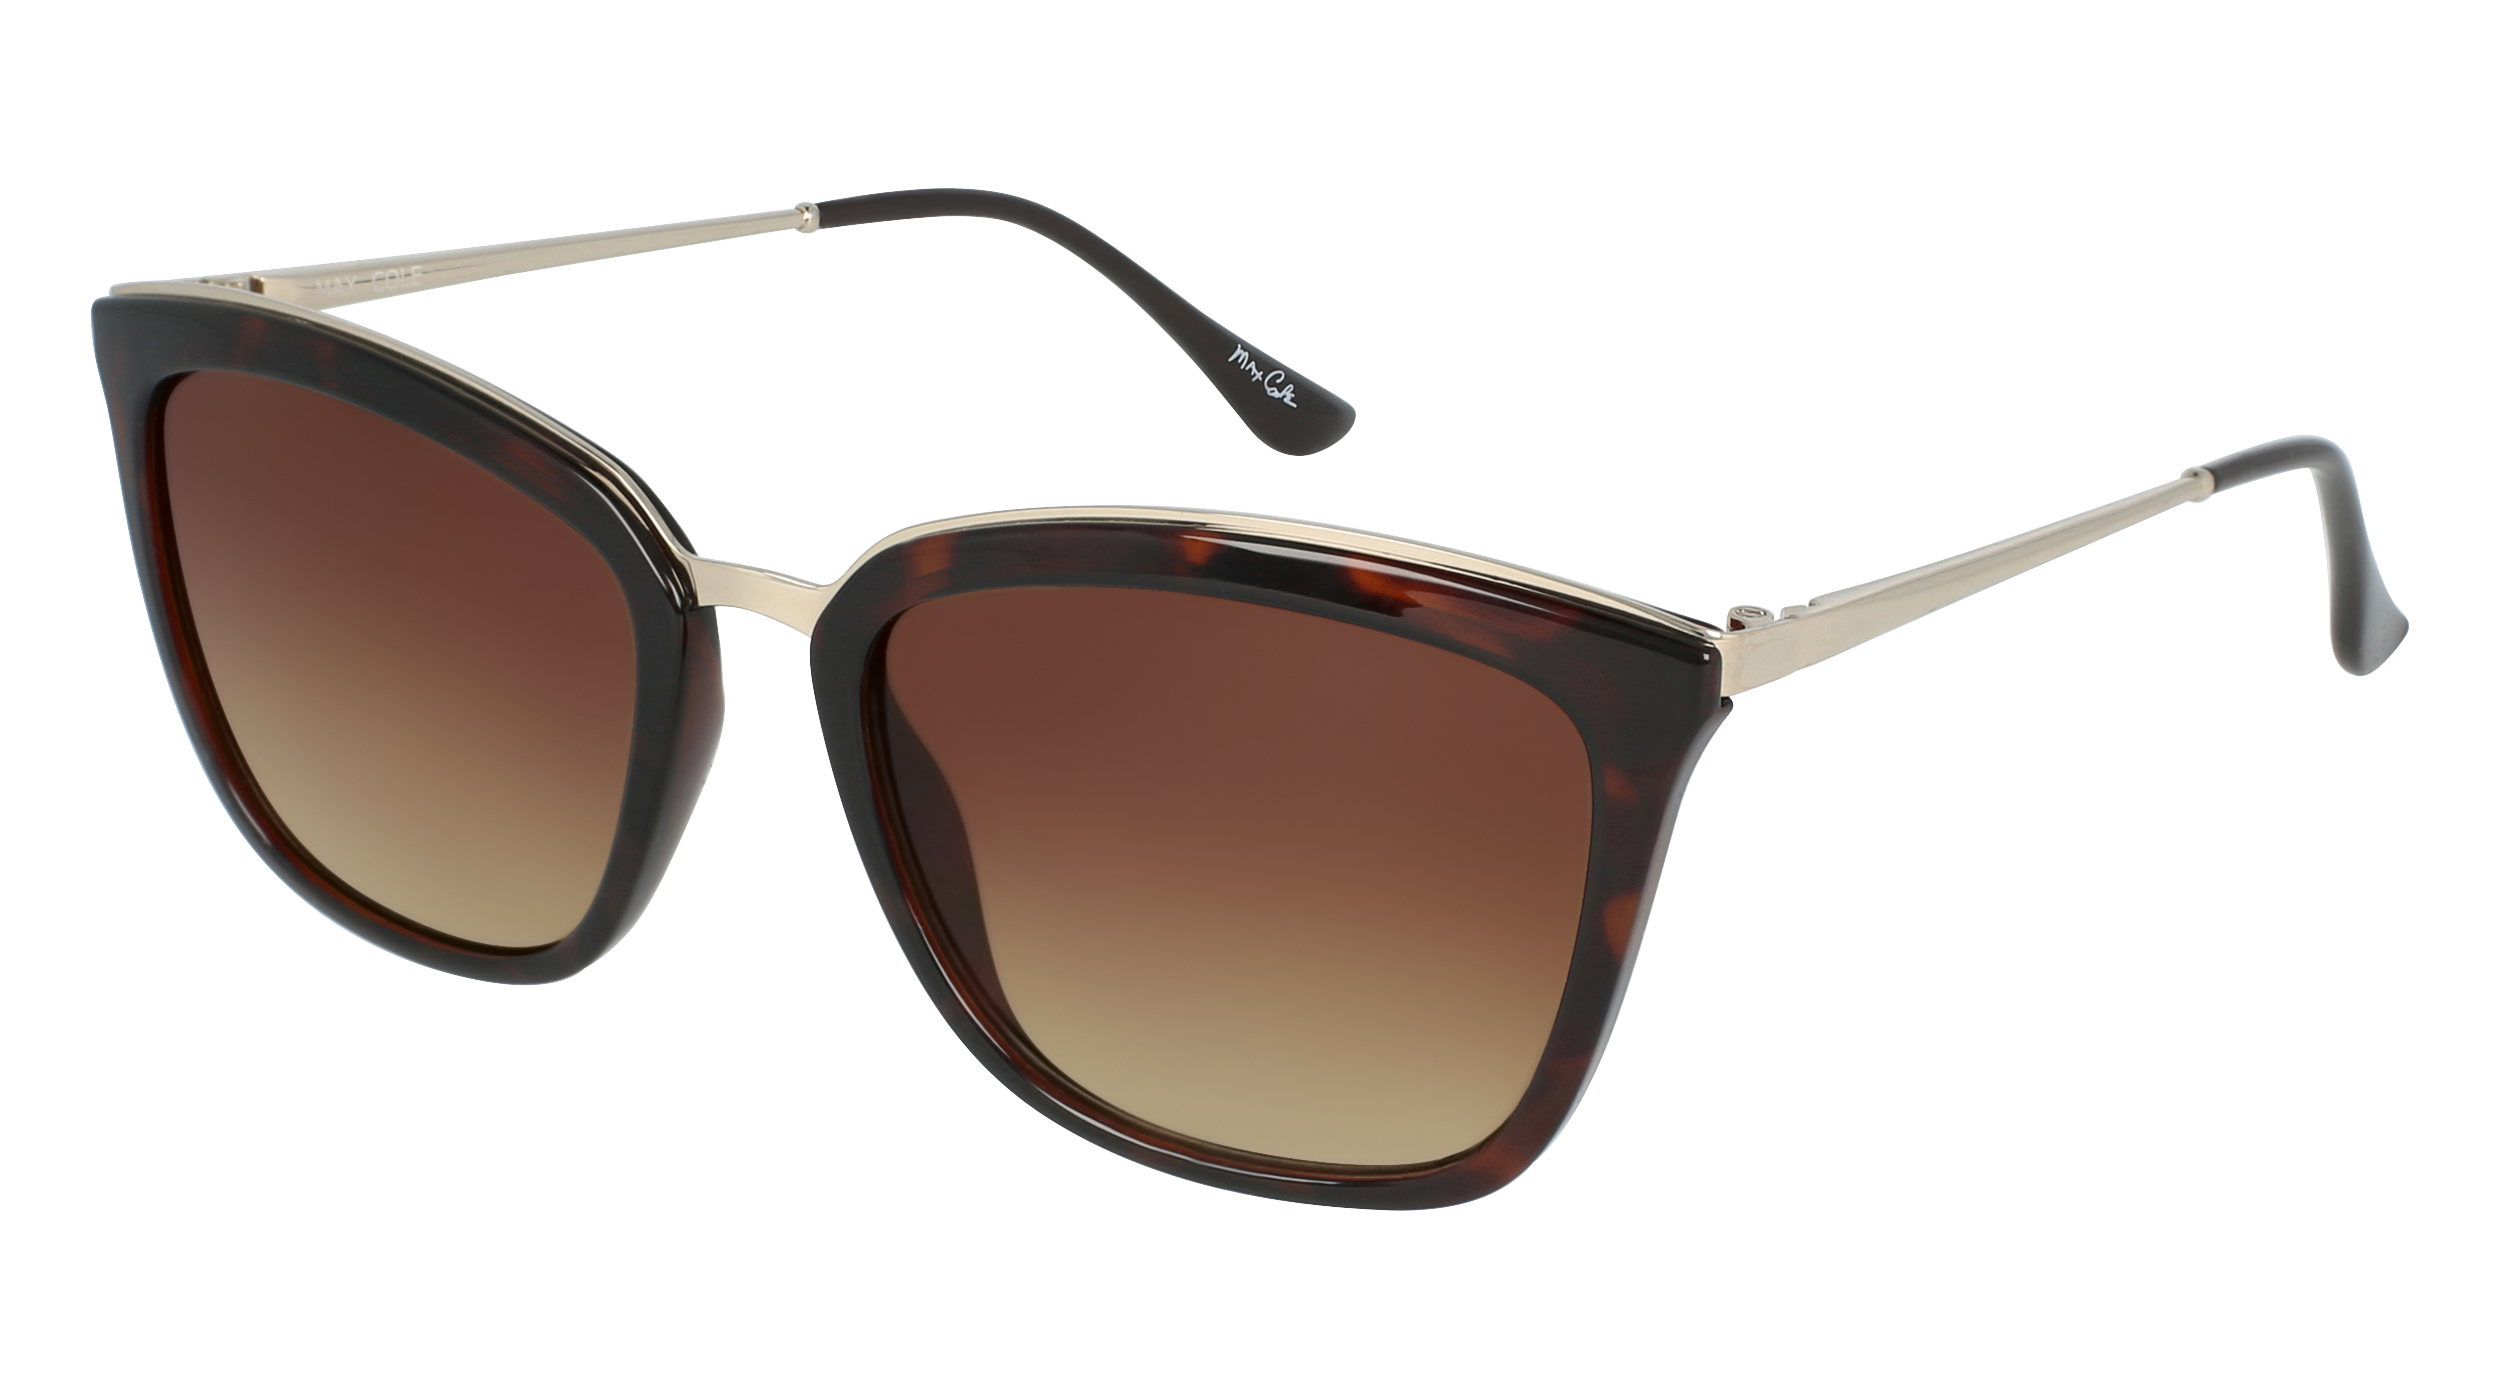 M MC 1506S women's sunglasses (from the side)